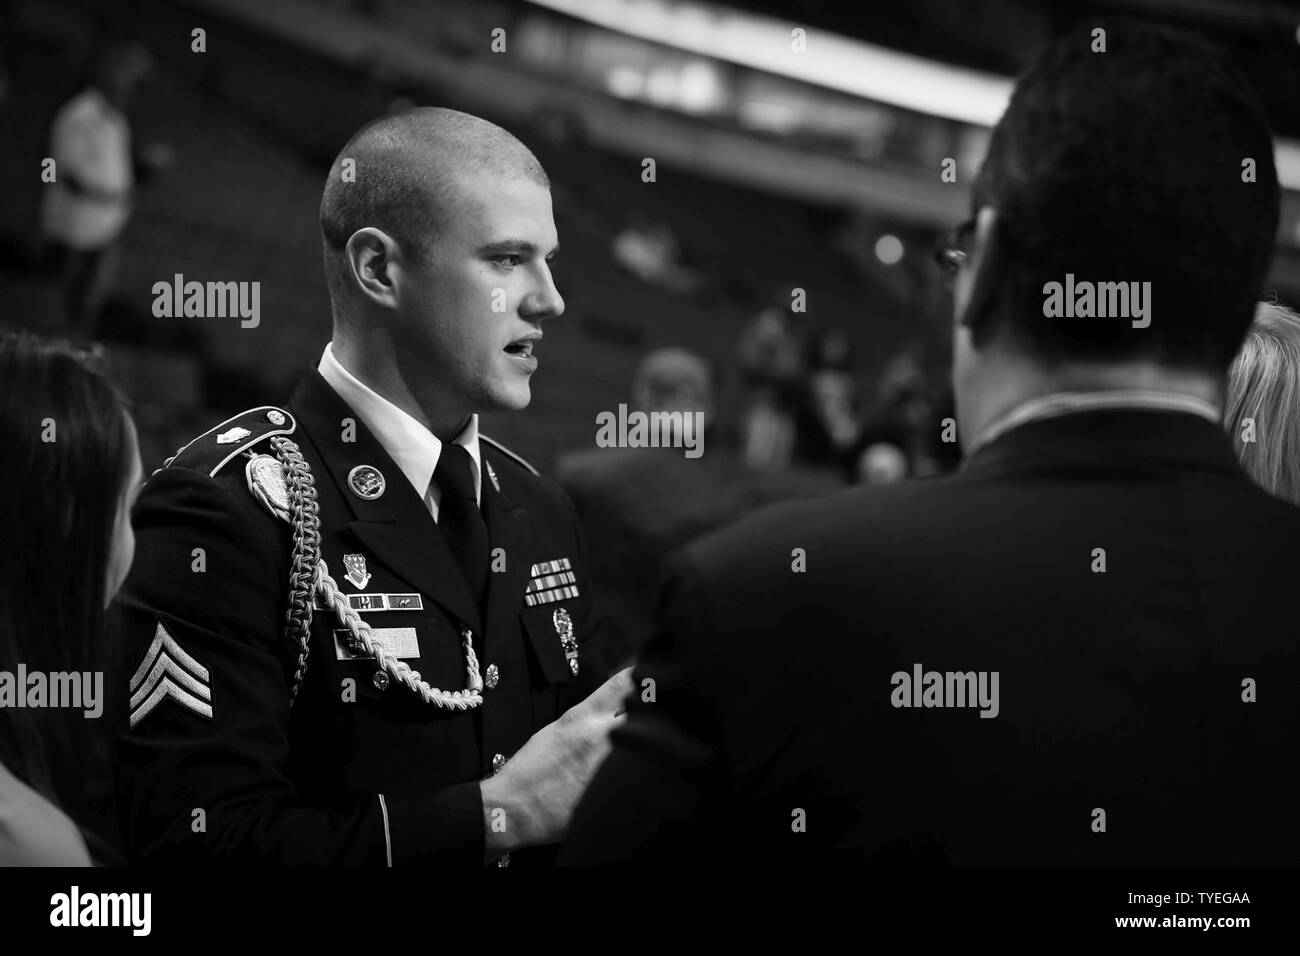 The 2015 U.S. Army Soldier of the Year Sgt. Jared Tansley, Illinois native, speaks with Chicago Bulls staff members before the Chicago Bulls vs. New York Knicks game at the United Center, Nov. 4, 2016. Tansley attended the game as part of a home-town recognition here in Illinois. During his visit, Tansley spoke at numerous locations throughout Chicago and Illinois to include his former high school in Sycamore, Illinois. Stock Photo